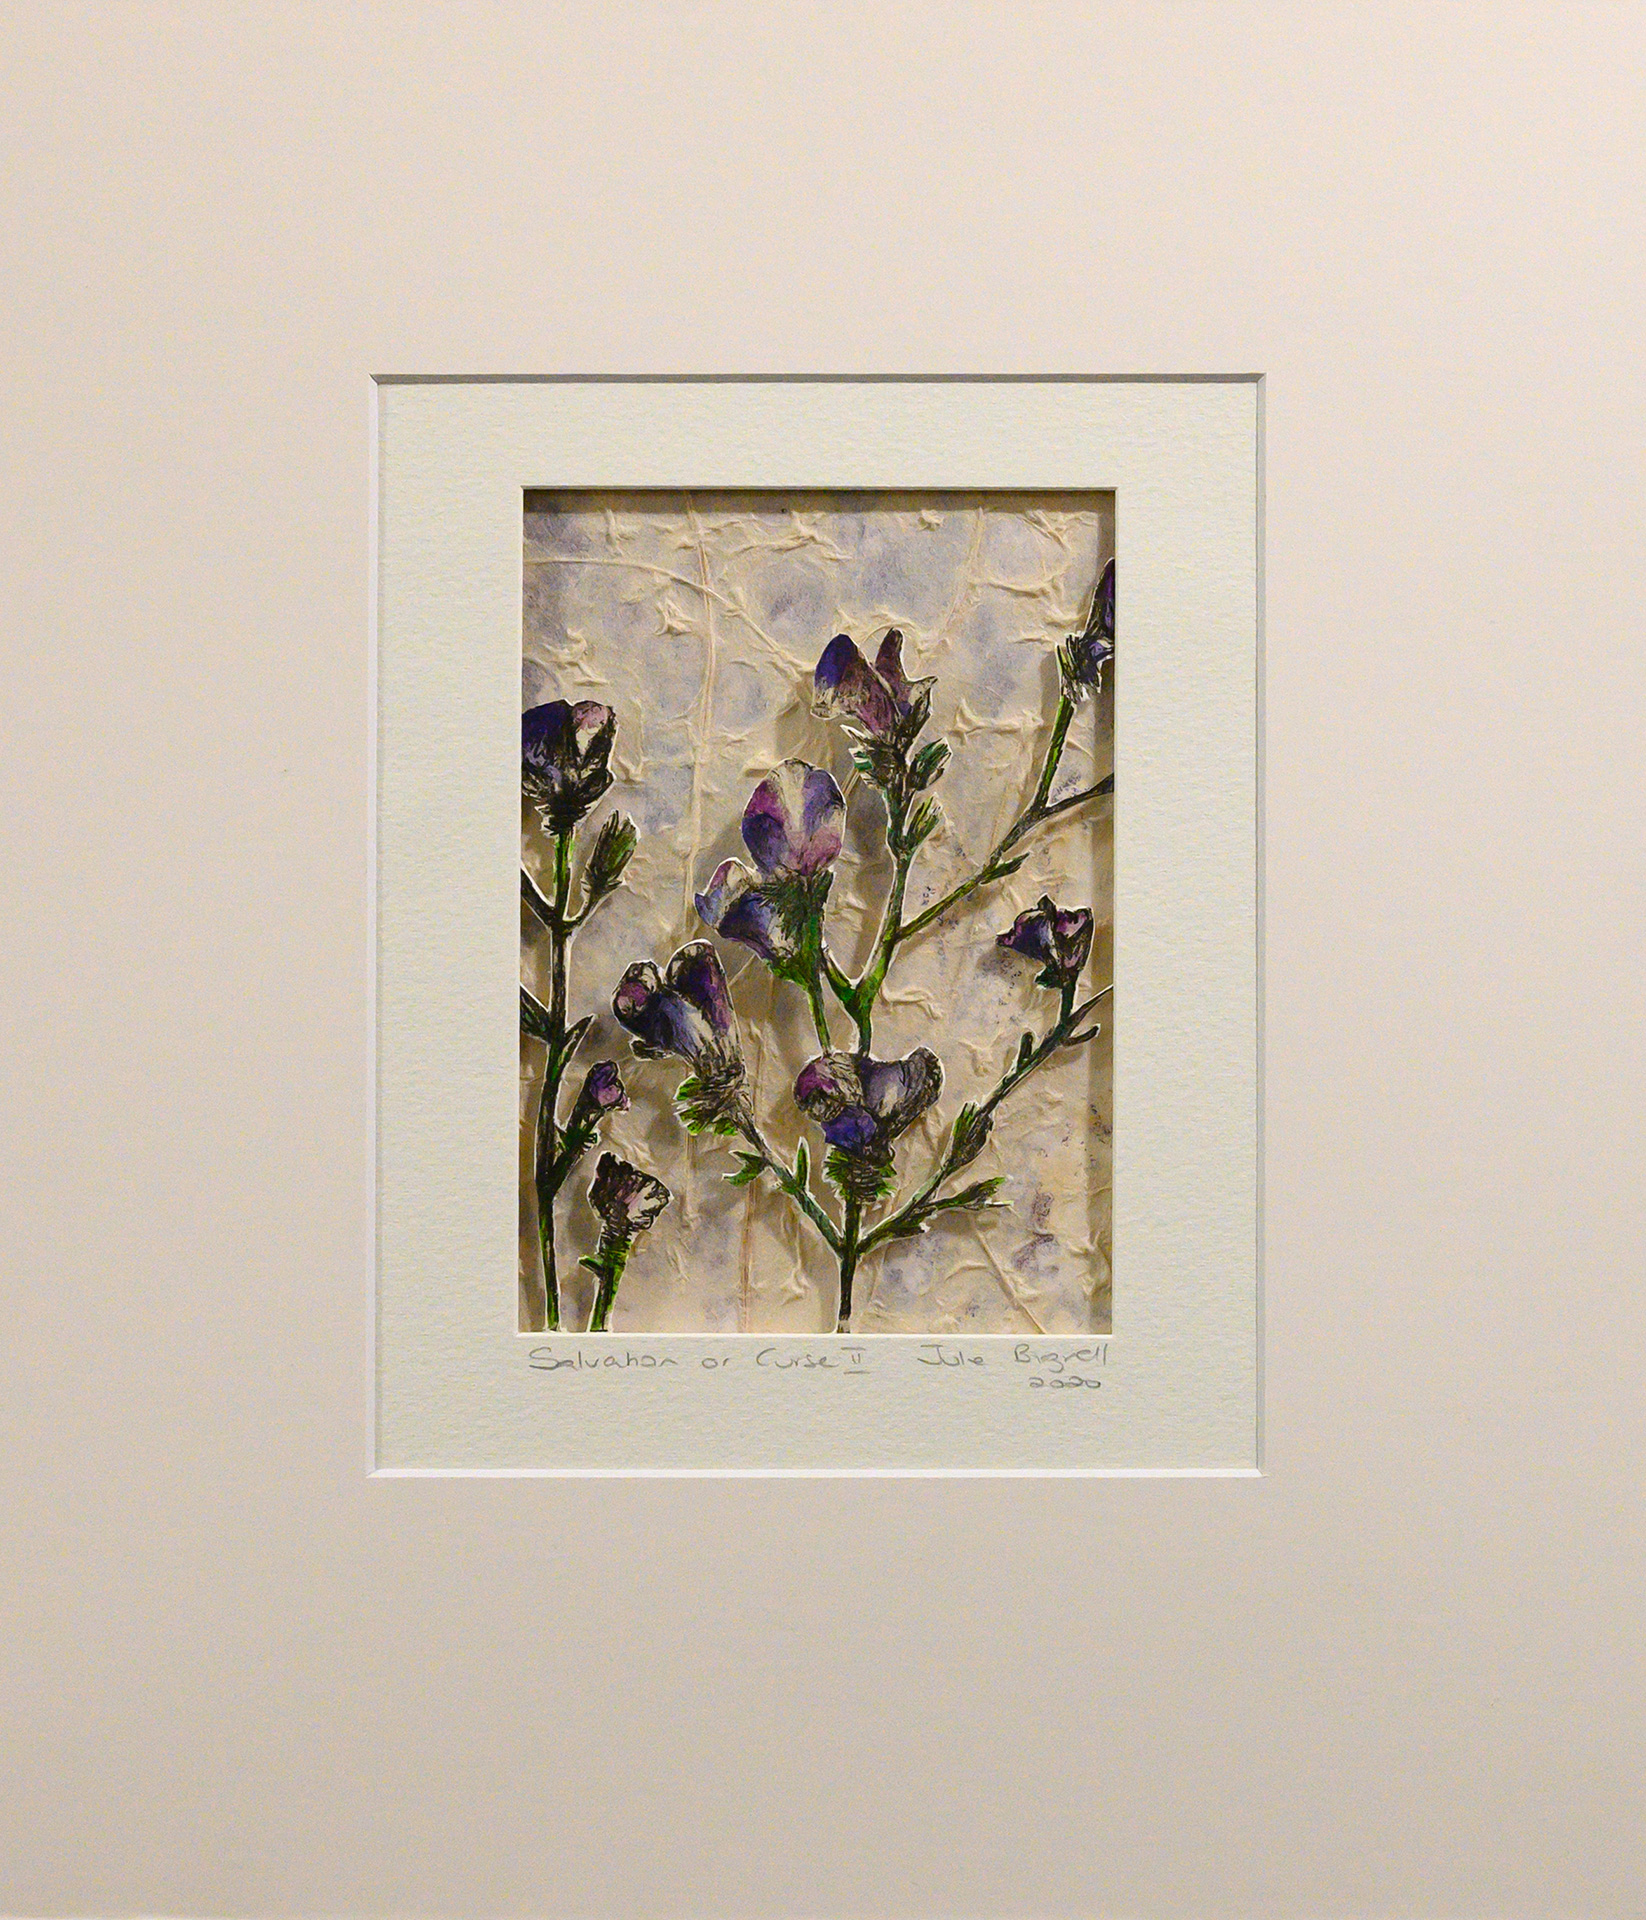 Unframed artwork by Julie Bignell of purple flowers cut out in the foreground with textured cream coloured paper in the background